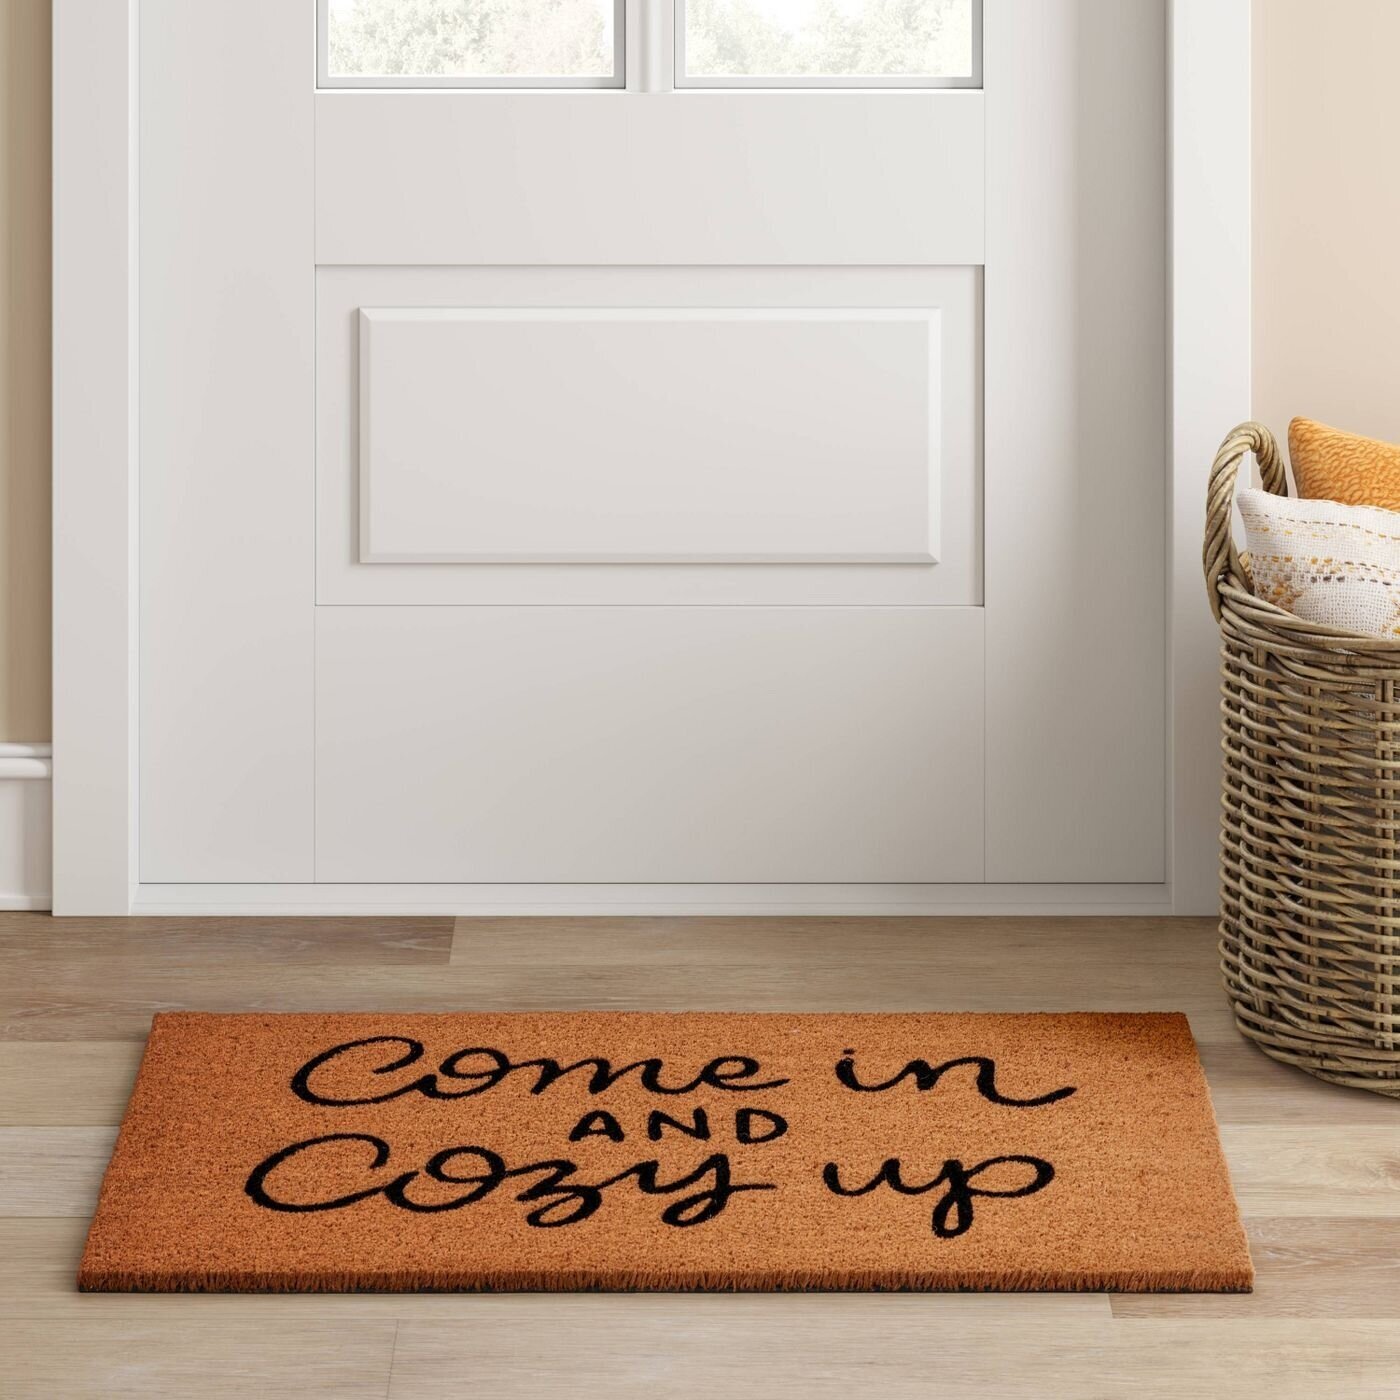 A welcome mat is a great way to bring a little seasonal cheer to your home. It is functional and most welcome mats are pretty affordable so you won’t be heartbroken if it doesn’t make it to next season.